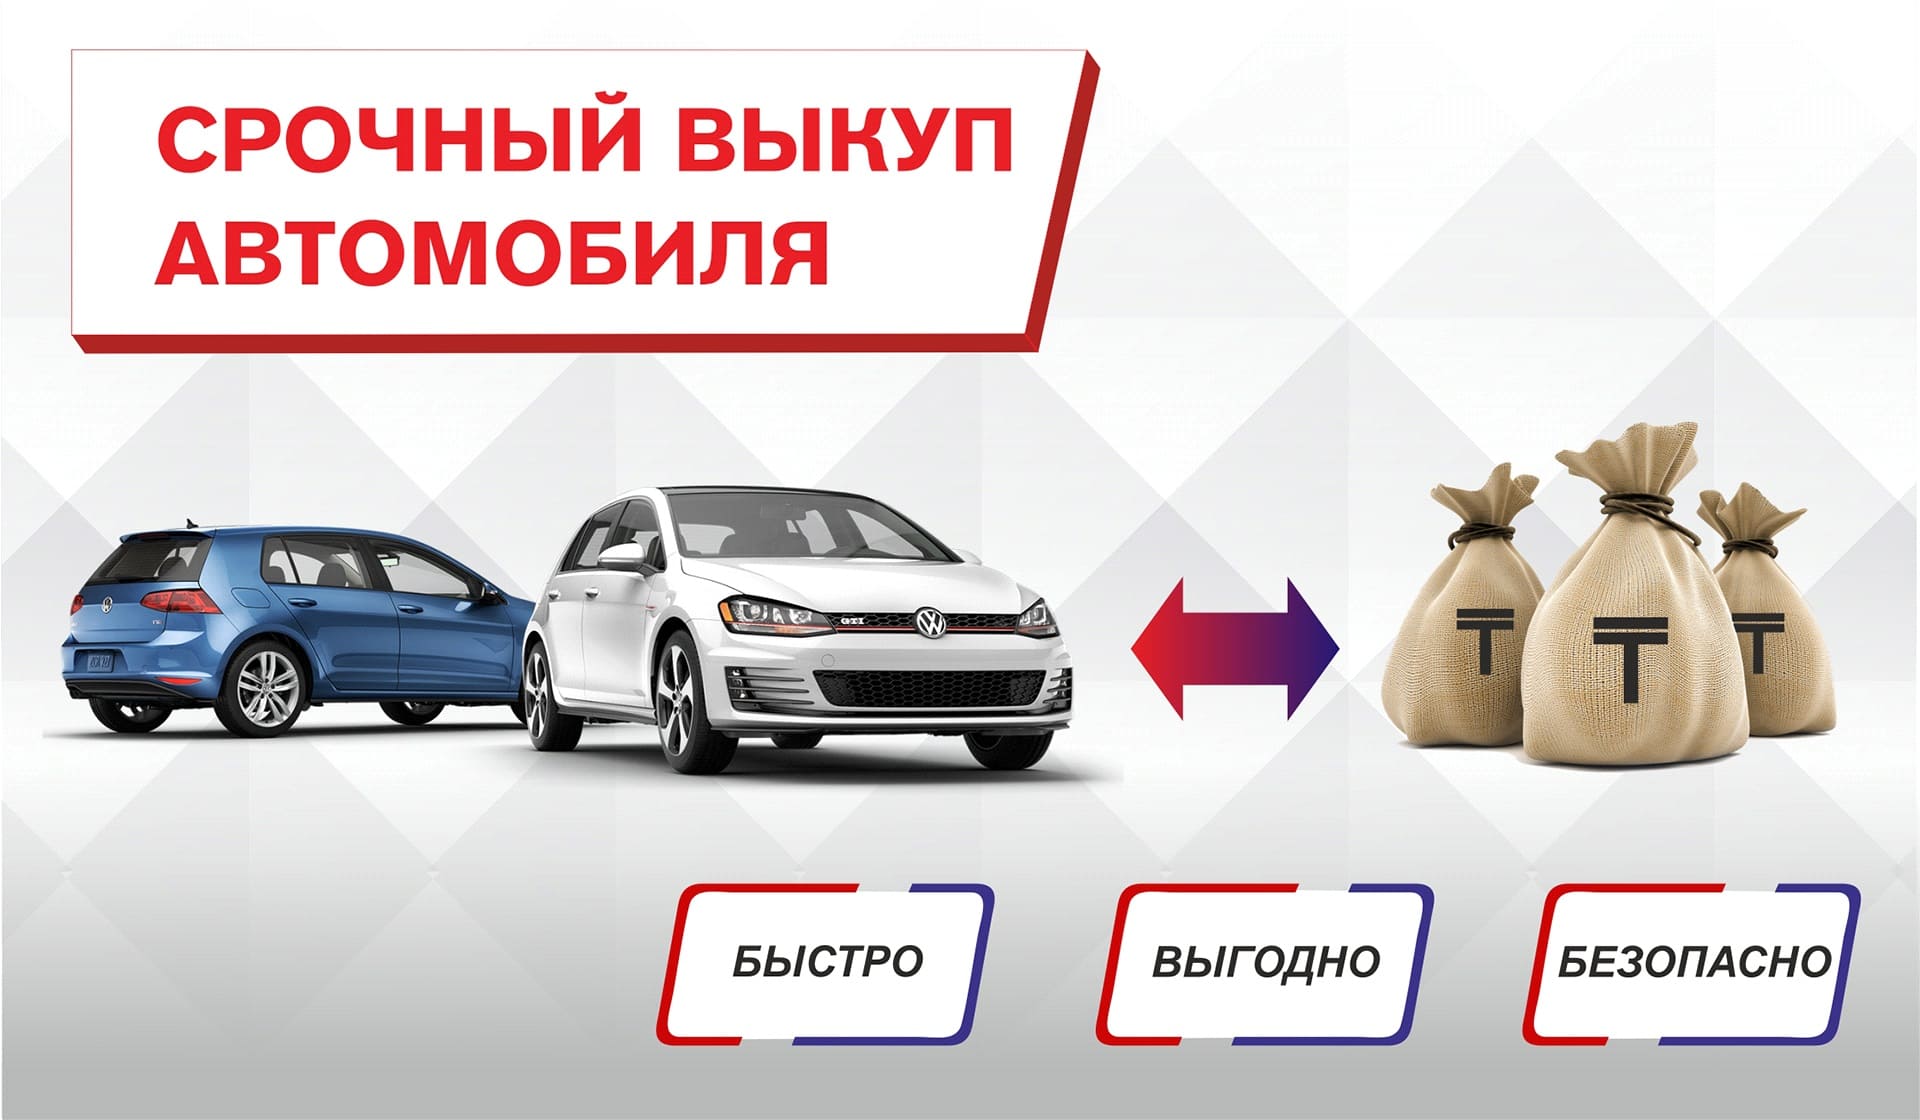 What Is выкуп авто and How Does It Work?